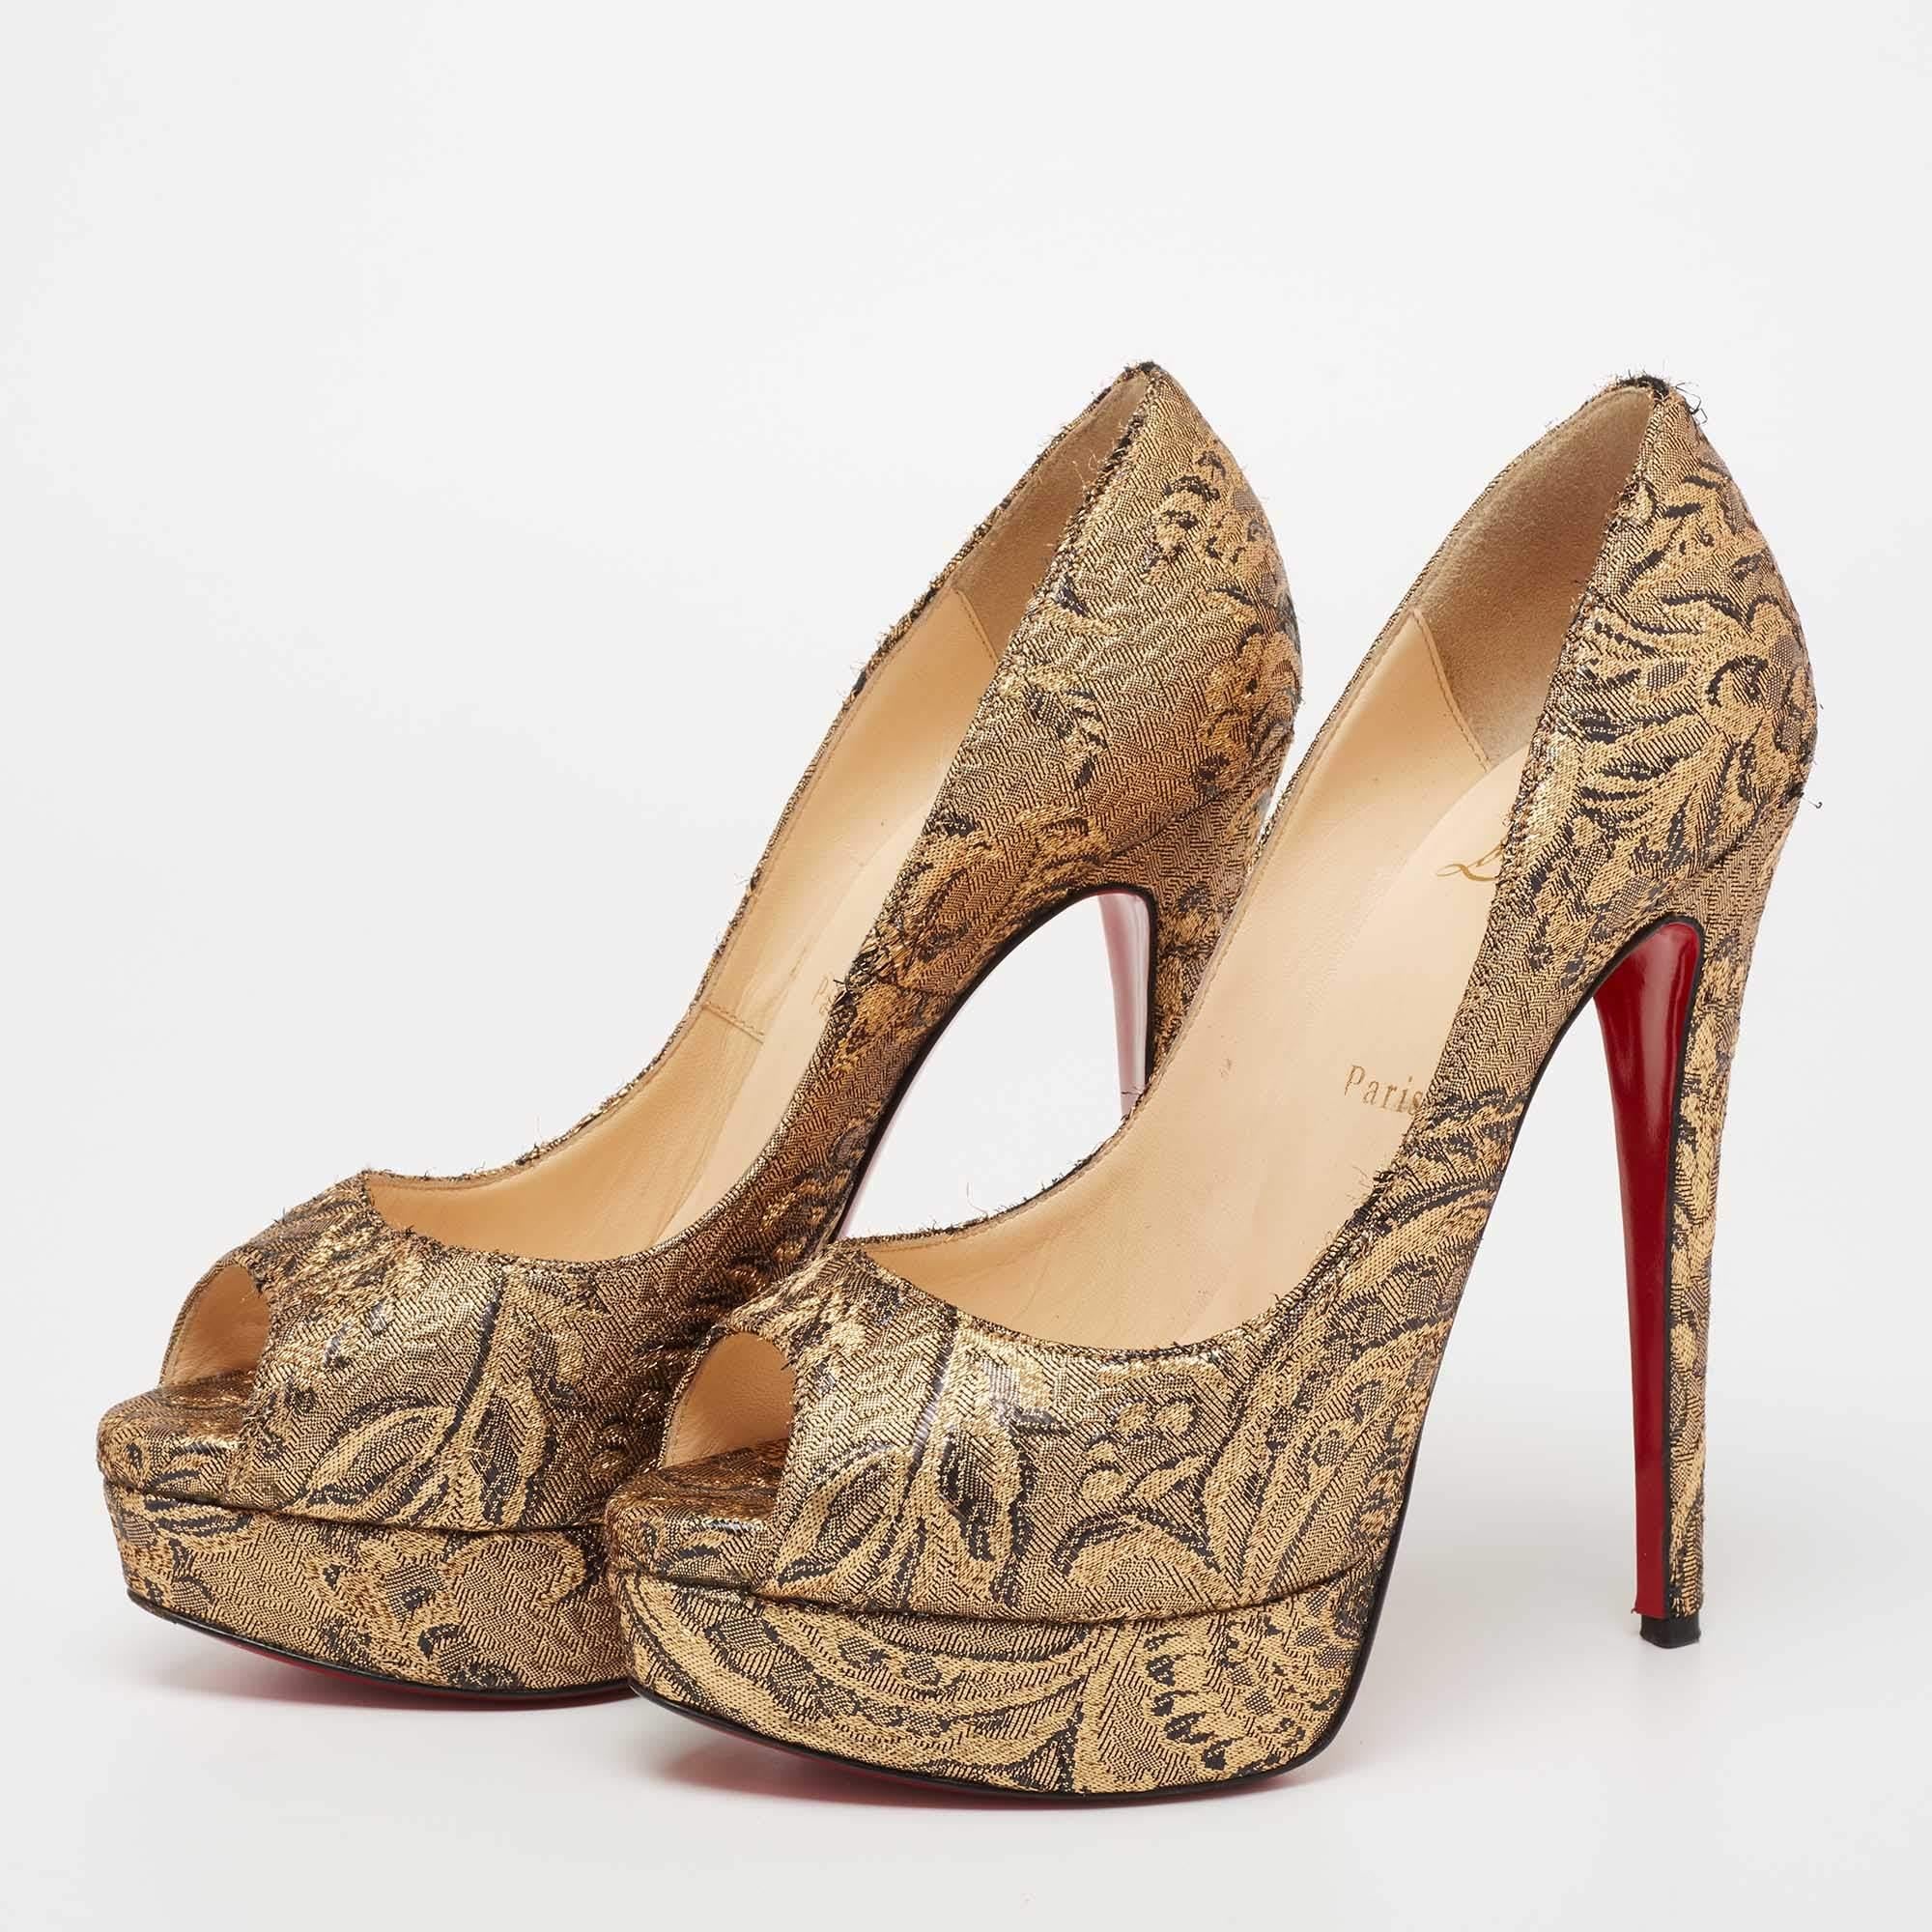 These curvaceous Christian Louboutin Lady Peep pumps are a timeless wardrobe staple. Crafted from luxurious material, they feature well-lined insoles that offer endless comfort.

